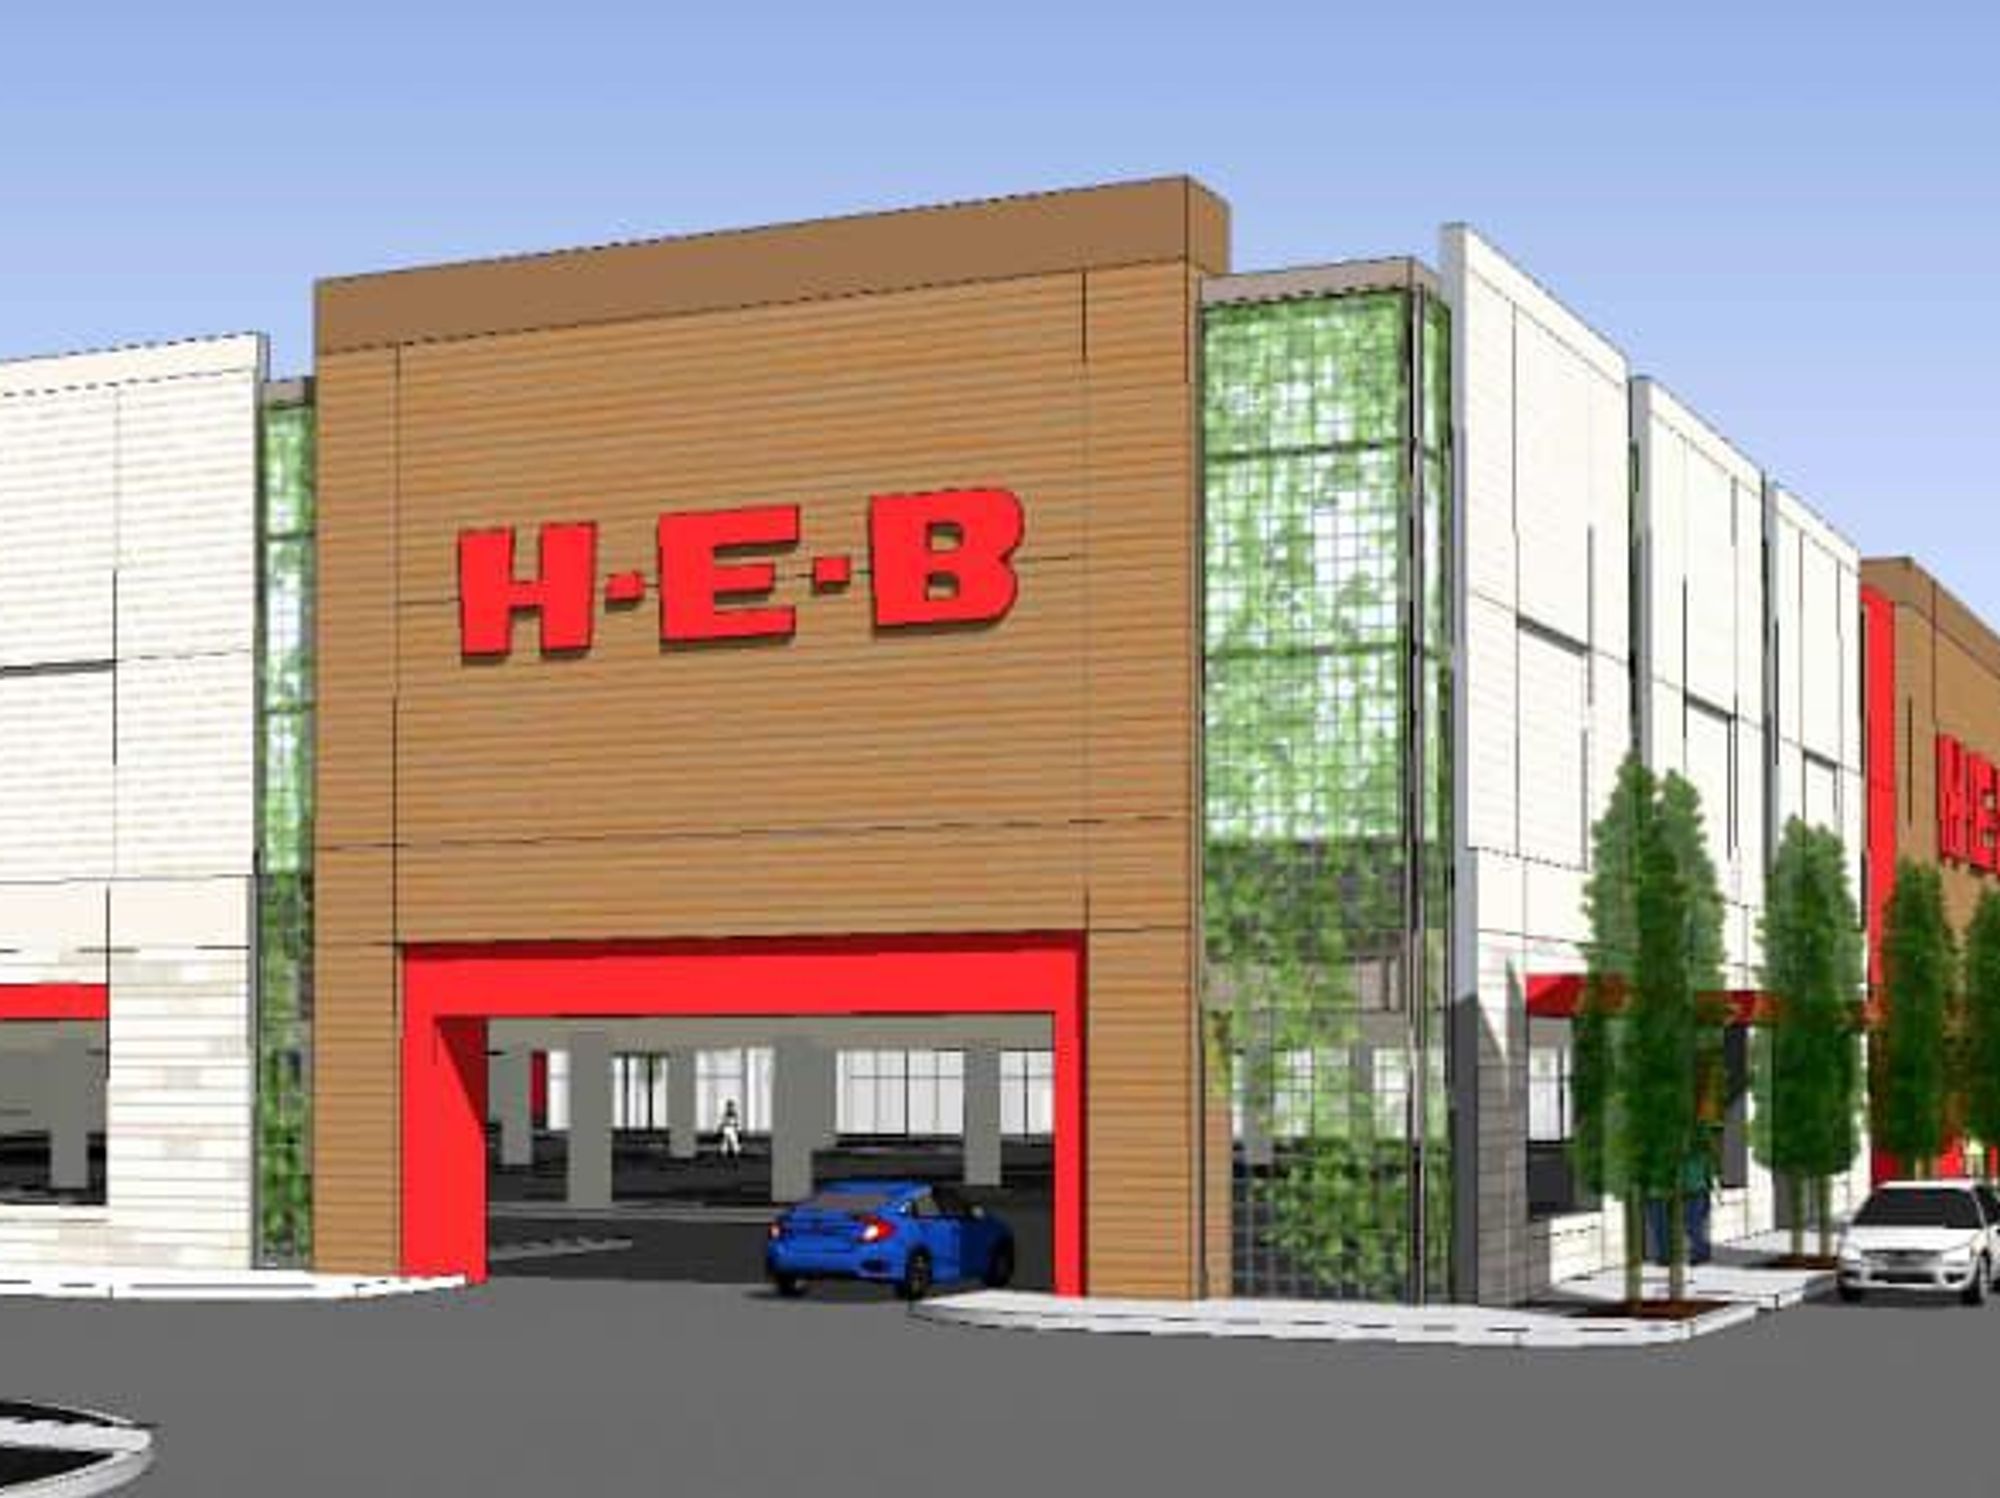 https://houston.culturemap.com/media-library/h-e-b-rendering-bellaire-multi-level-two-story.jpg?id=31523866&width=2000&height=1500&quality=85&coordinates=207%2C0%2C207%2C0